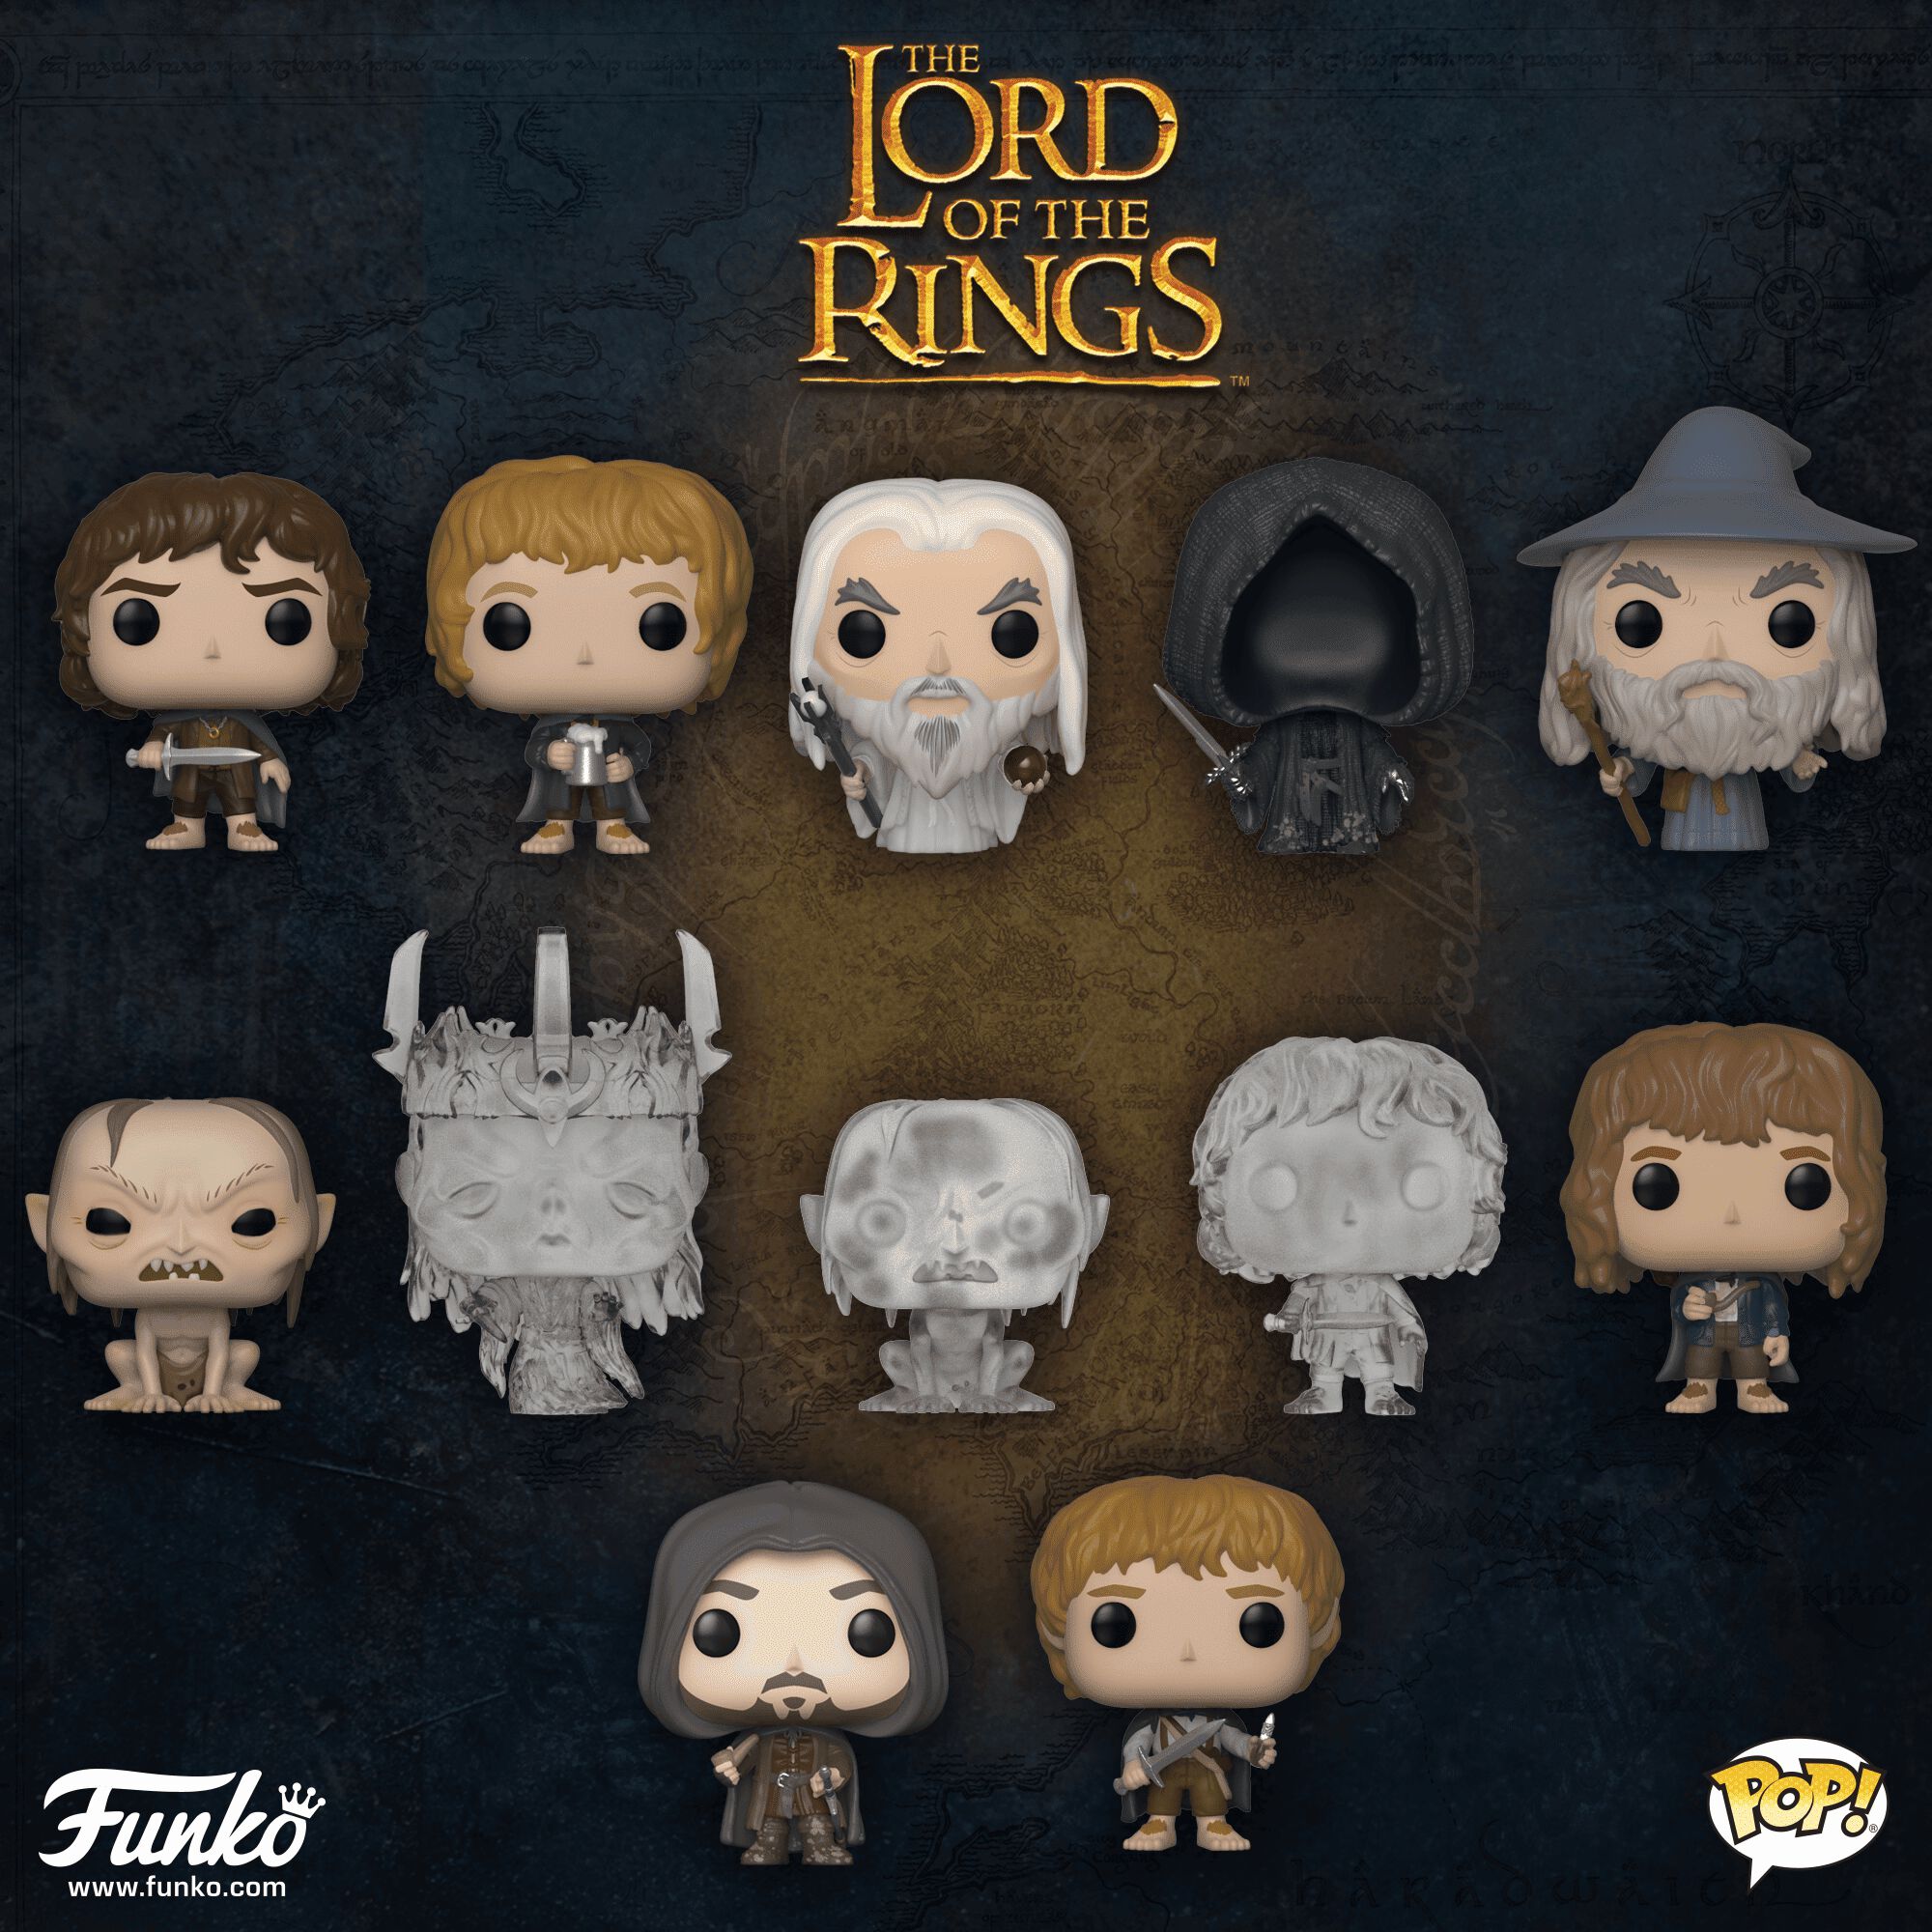 Coming Soon: Lord of the Rings Keychains & Pop!